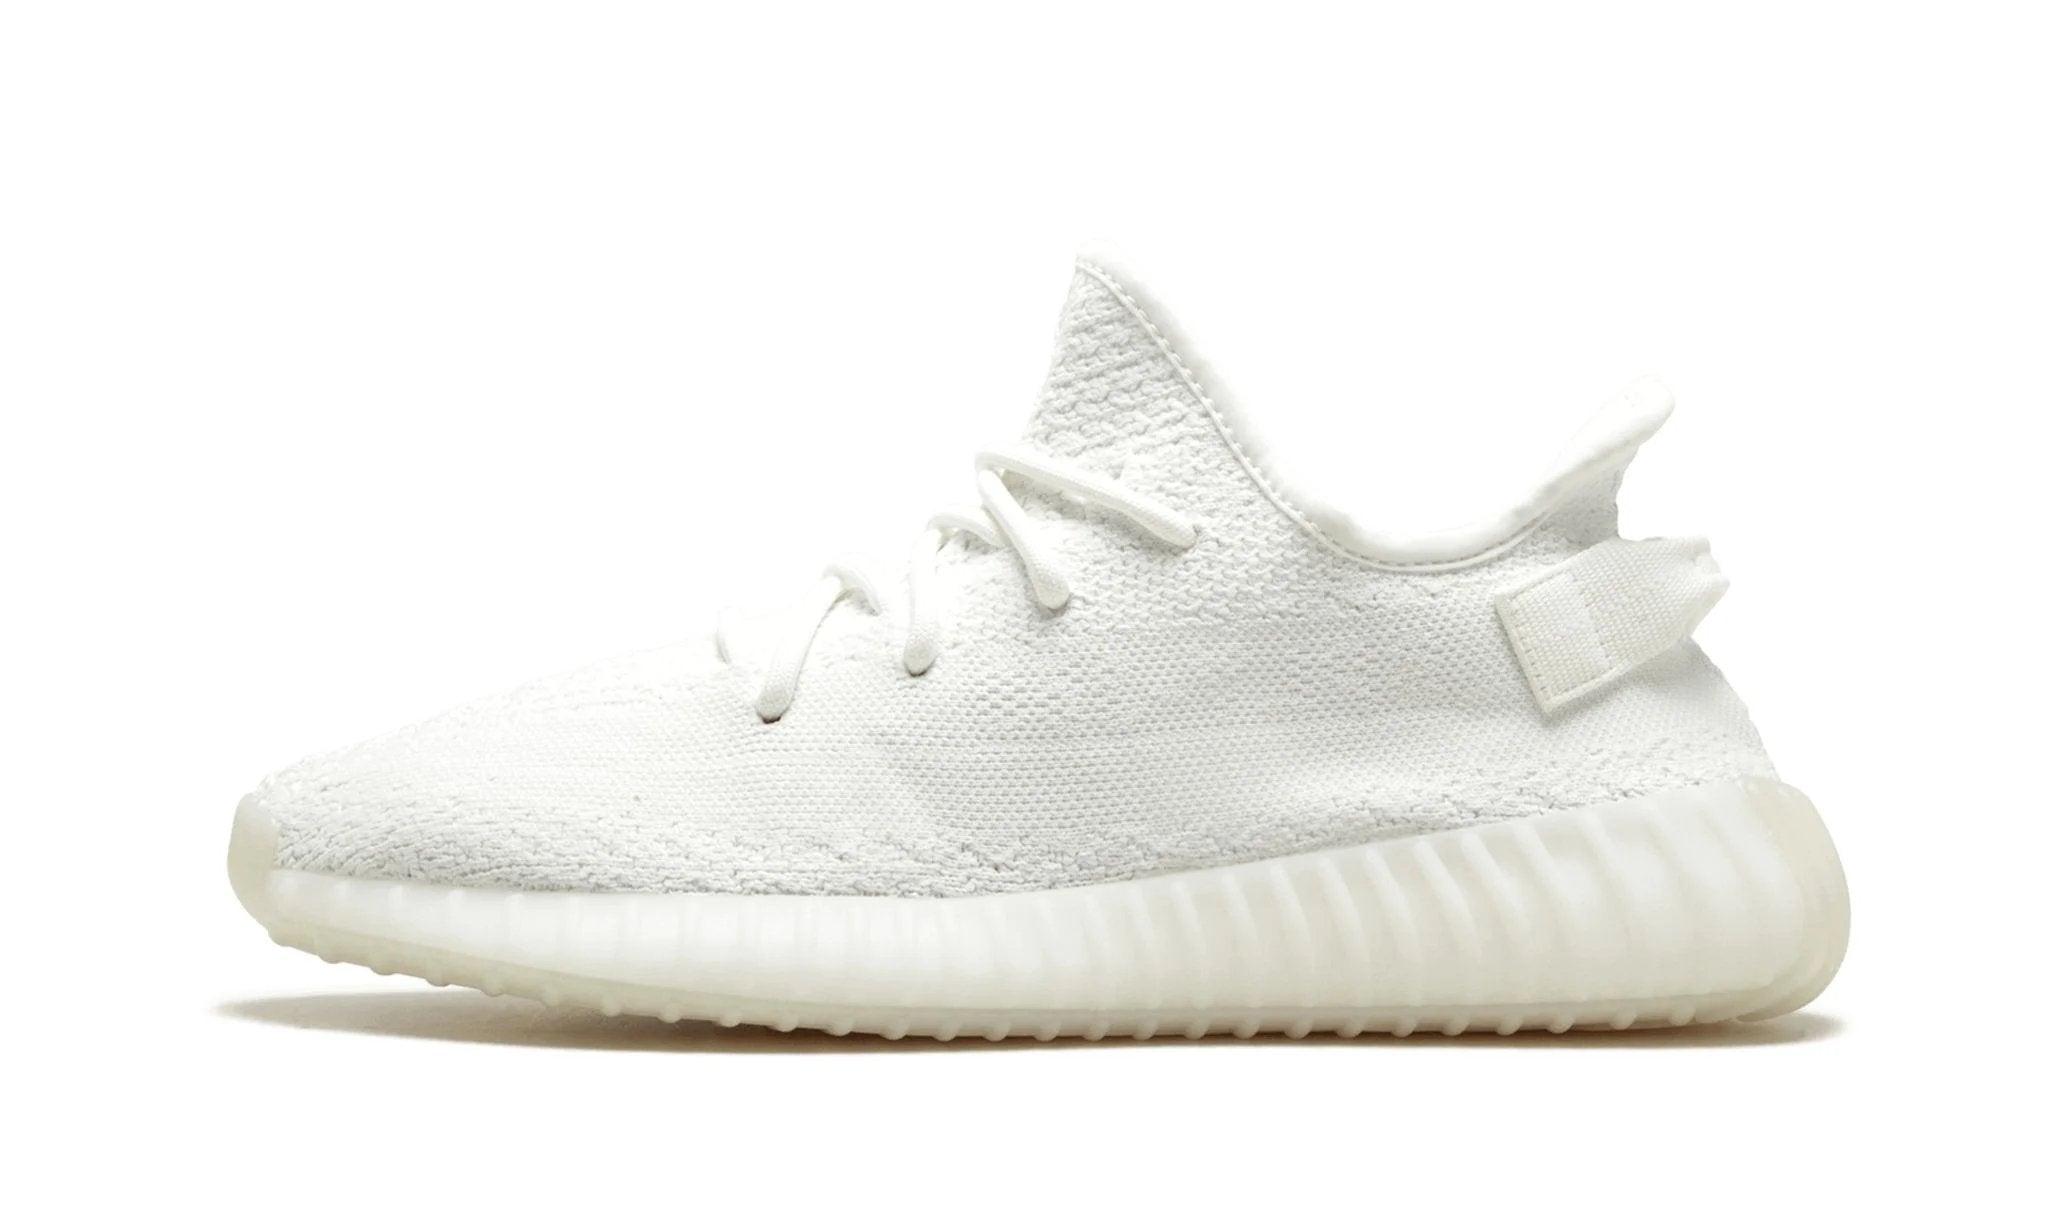 Yeezy Boost 350 V2 Cream - CP9366 - Sneakers